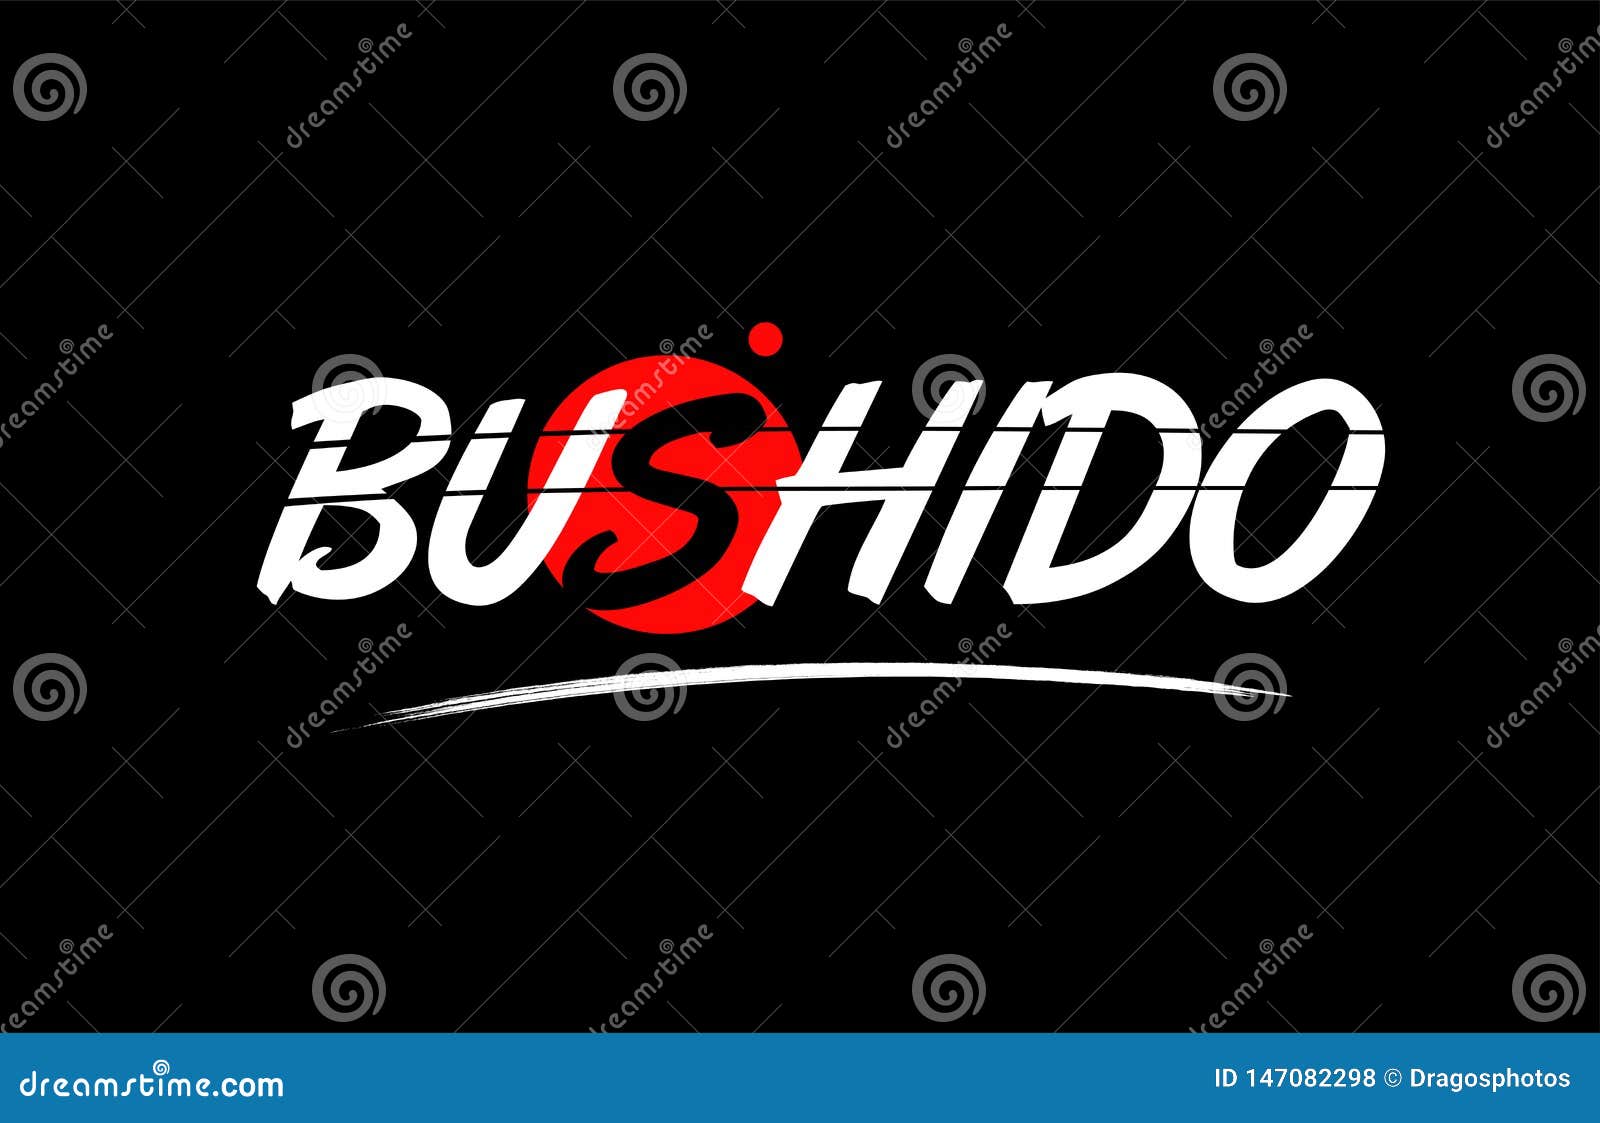 Bushido Word Text Logo Icon with Red Circle Design Stock